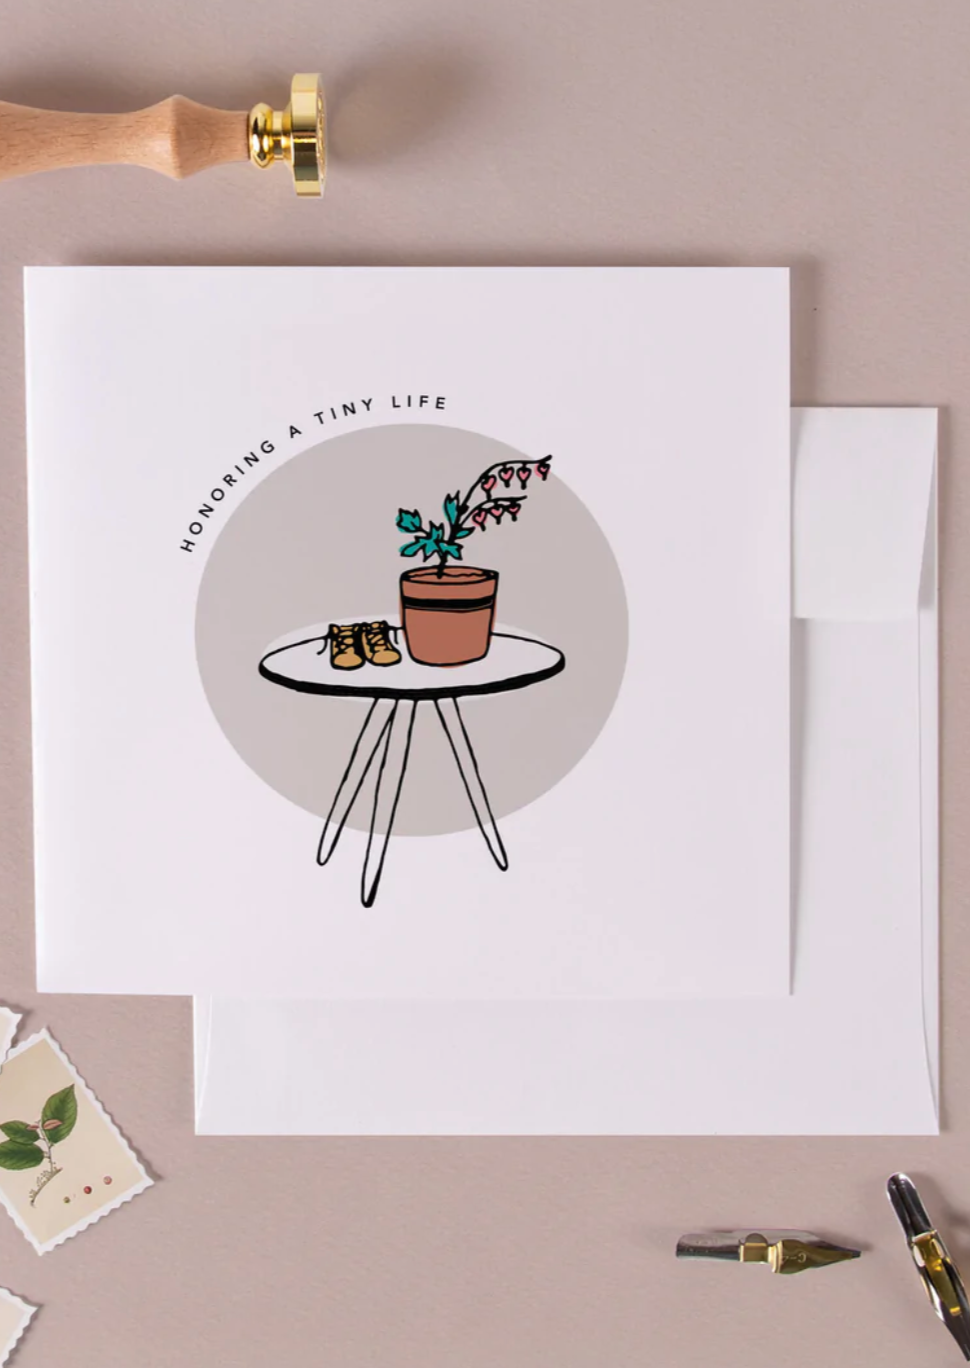 Baby Greeting Cards Accessories Honoring Tiny Life